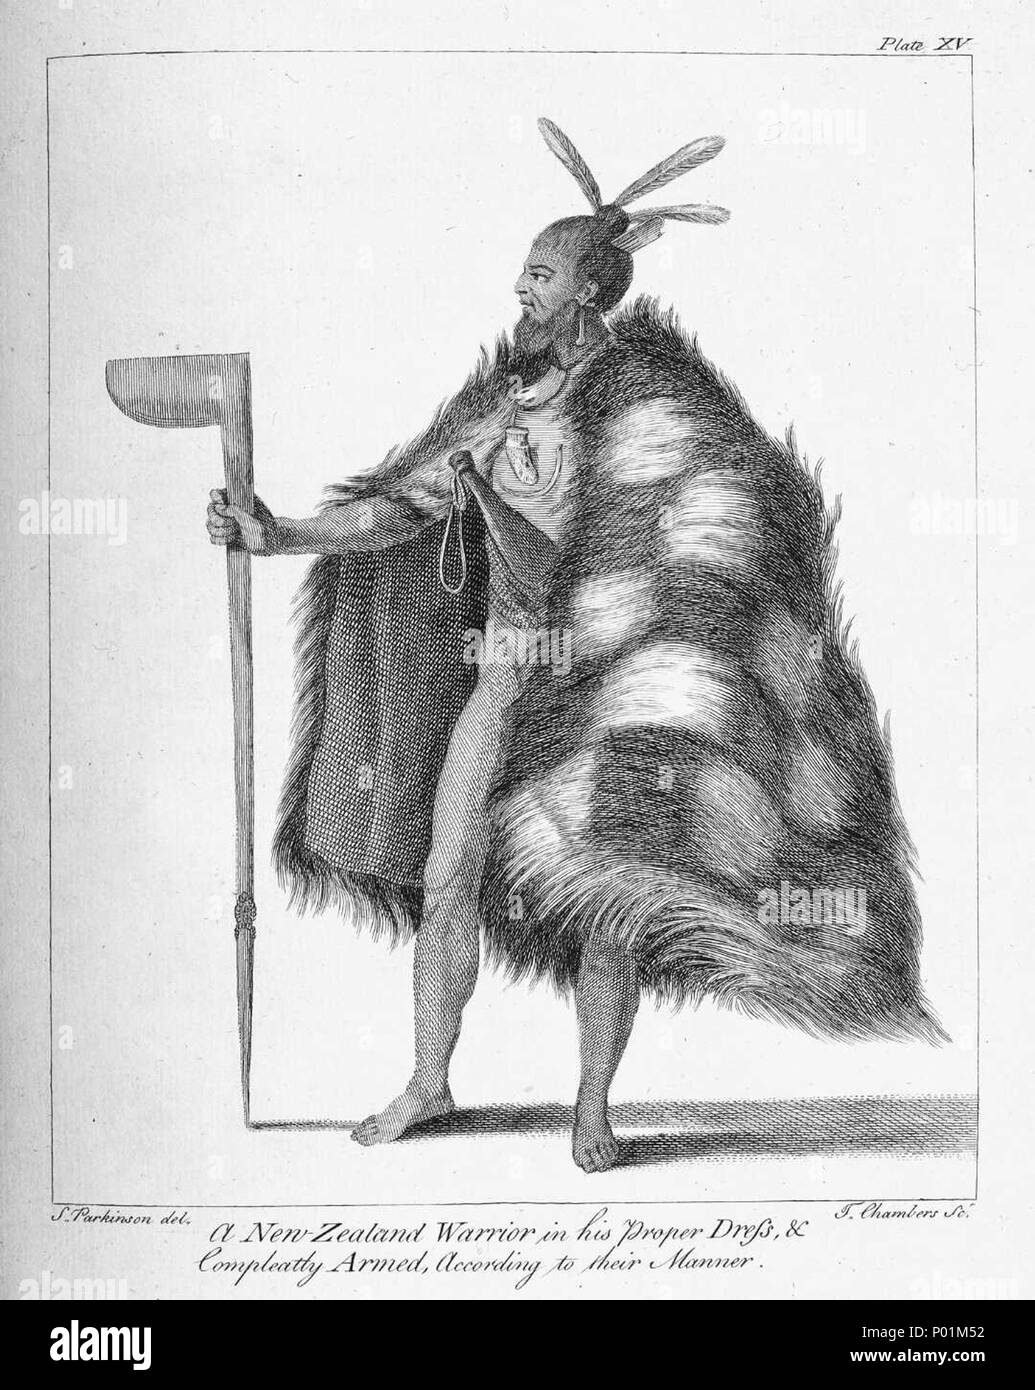 . Parkinson, Sydney, 1745-1771 :A New Zealand warrior in his proper dress & compleatly armed according to their manner. Parkinson del. T. Chambers sc. [London, 1773] Reference Number: PUBL-0179-15 A standing portrait of a Maori man, holding a tewhatewha in his outstretched left hand. He has a topknot hairstyle, and feathers in his hair, a fine dogskin cloak in a chequered pattern, a patu tucked into his belt and bone ornaments at his neck. Key terms: 1 image, categorised under Engravings and Portraits, related to Thomas Chambers, Sydney Parkinson, Men, Maori, Weapons, Maori, Maori - Clothing a Stock Photo